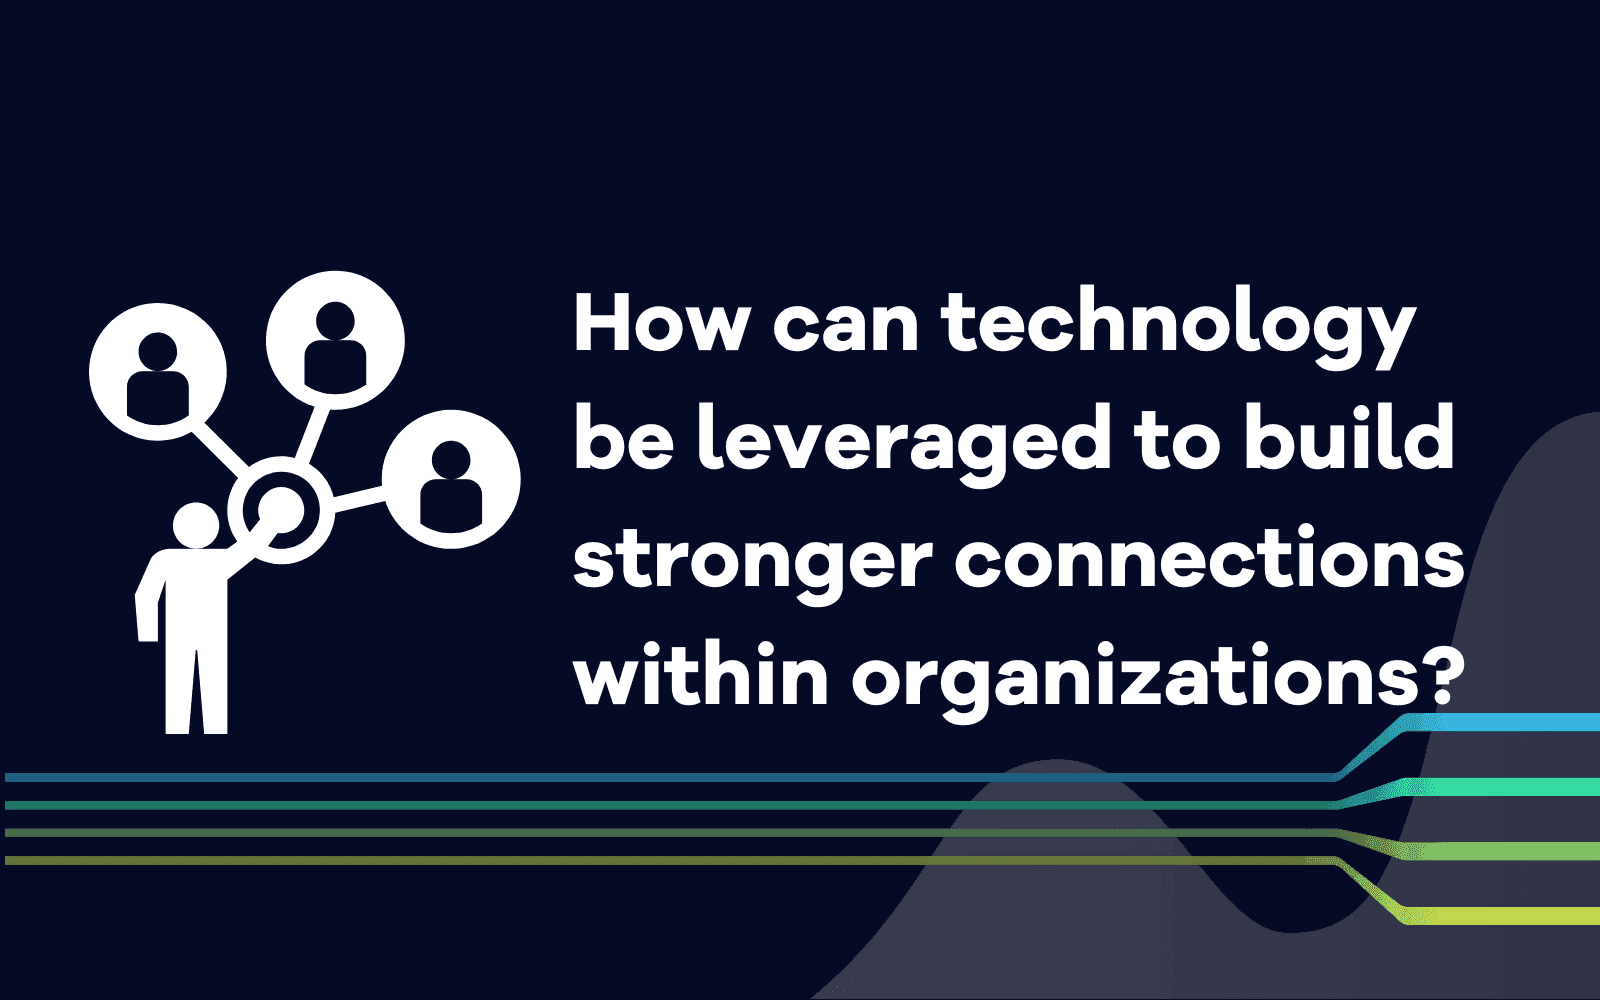 How can technology be leveraged to build stronger connections within organizations